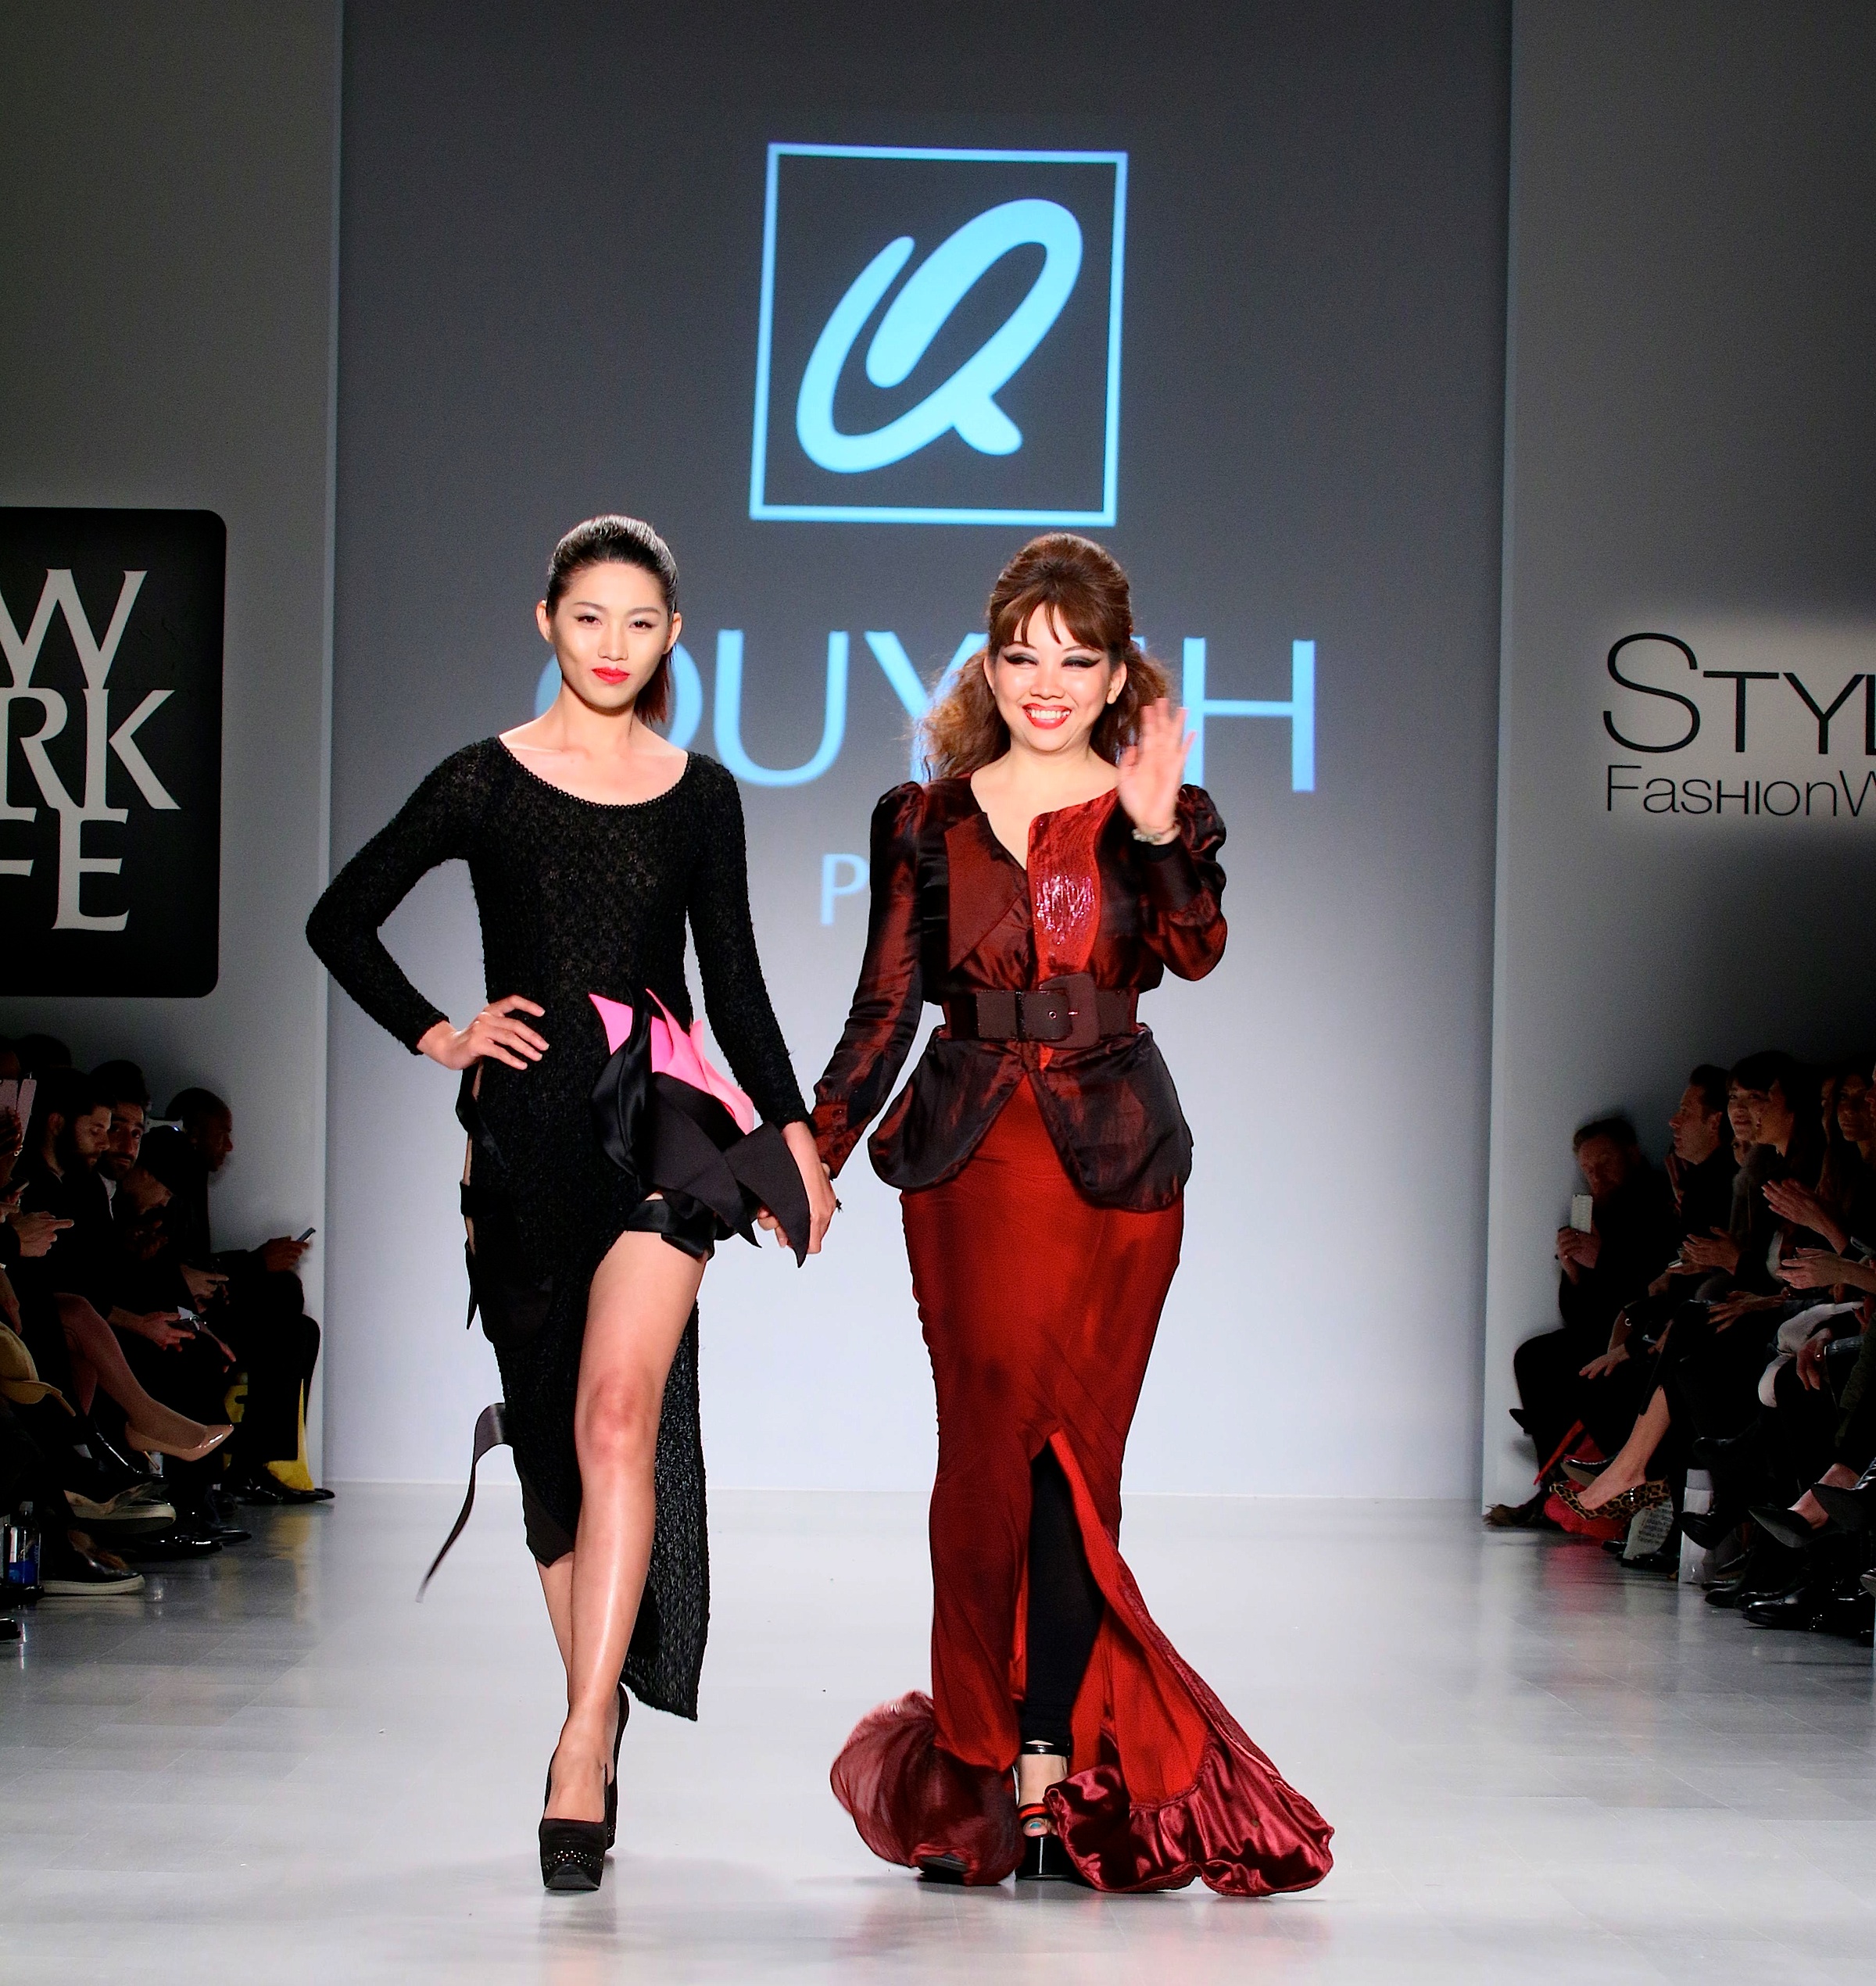 Quynh sashays down the runway with one of her elegantly dressed models in her beautiful designs. Photo courtesy of Winston Burris/Burris Agency